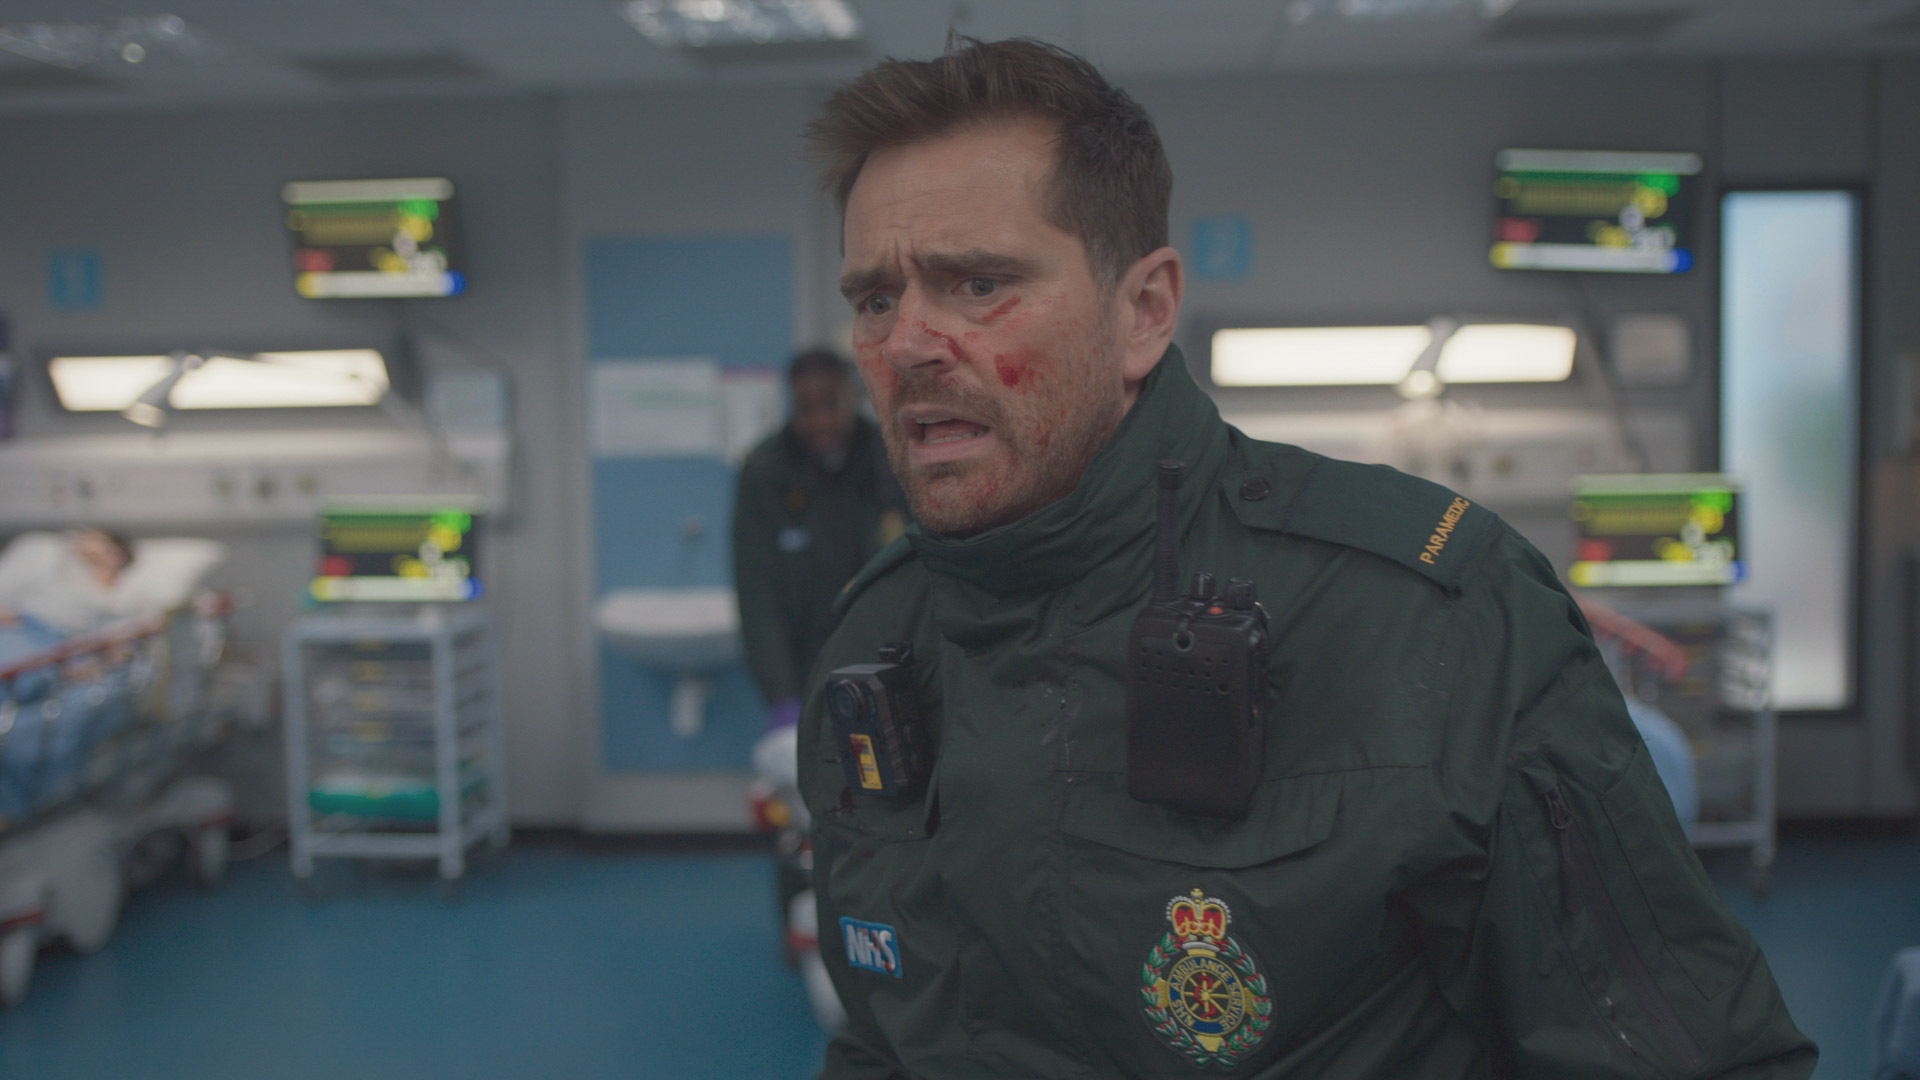 Iain Dean, bloodied and shaken, is pushed to the brink in Casualty episode Take the Strain.